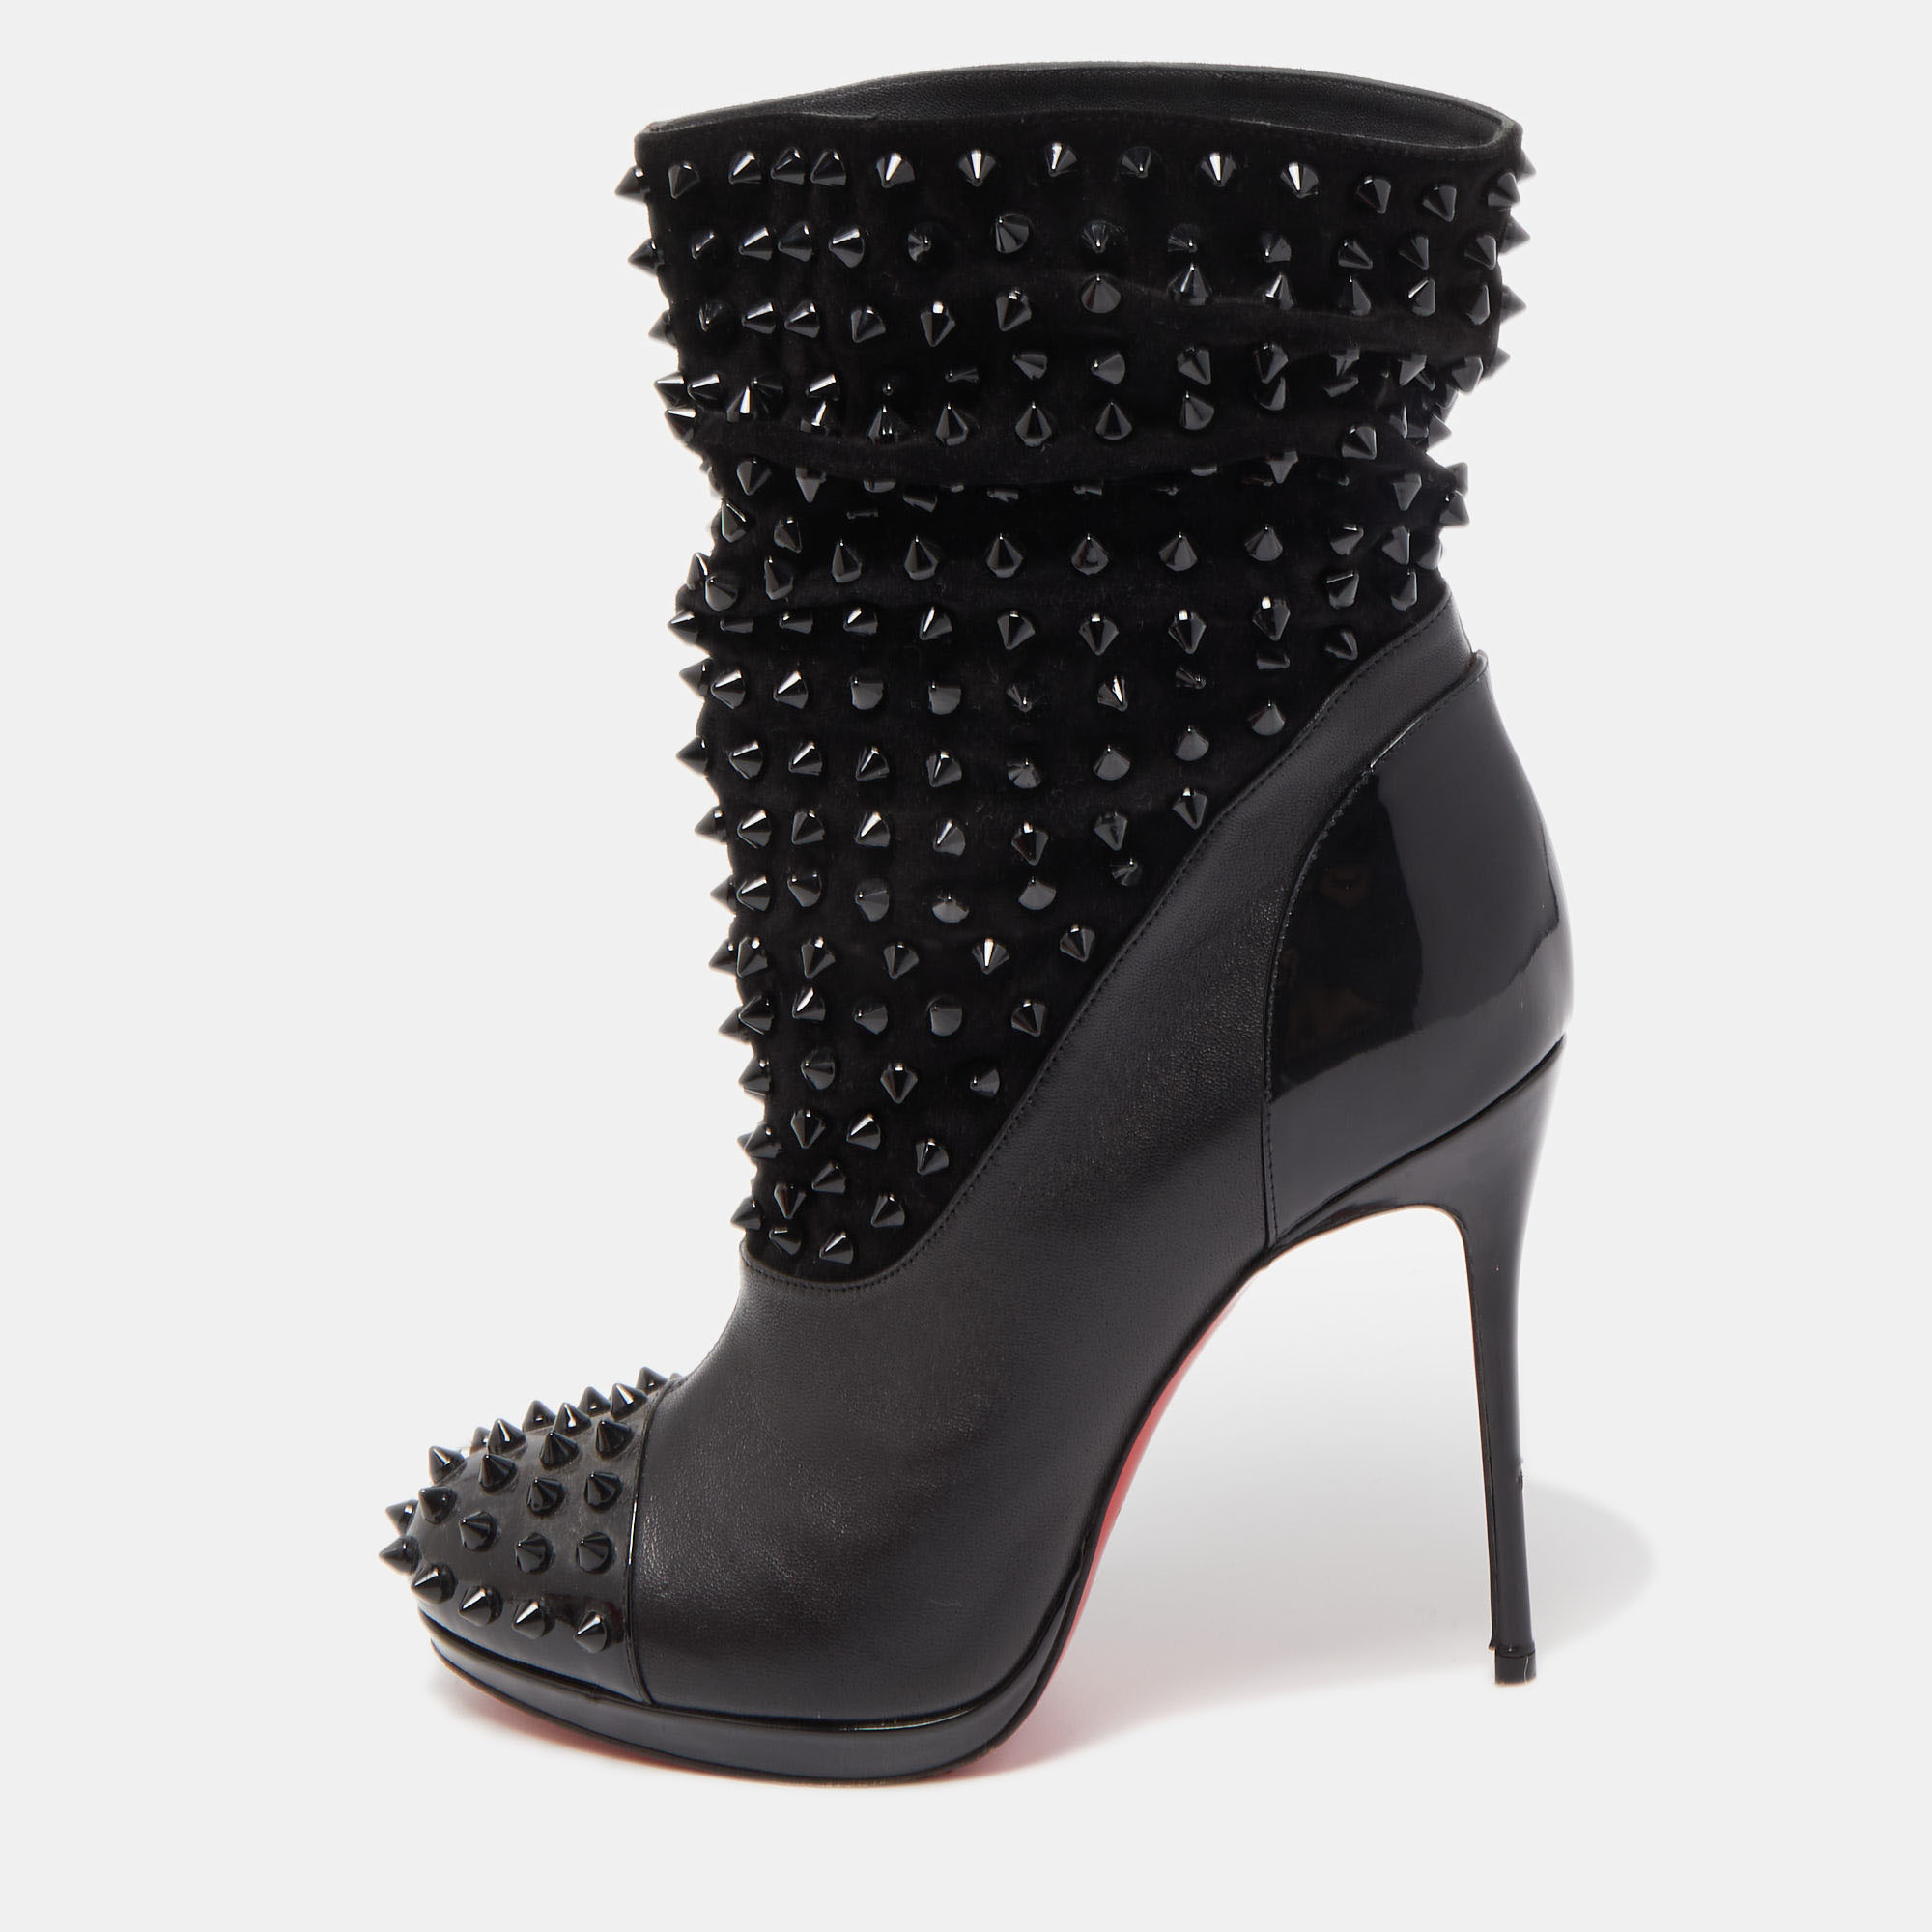 Janetta - Low Boots - Calf Leather - Black - Christian Louboutin